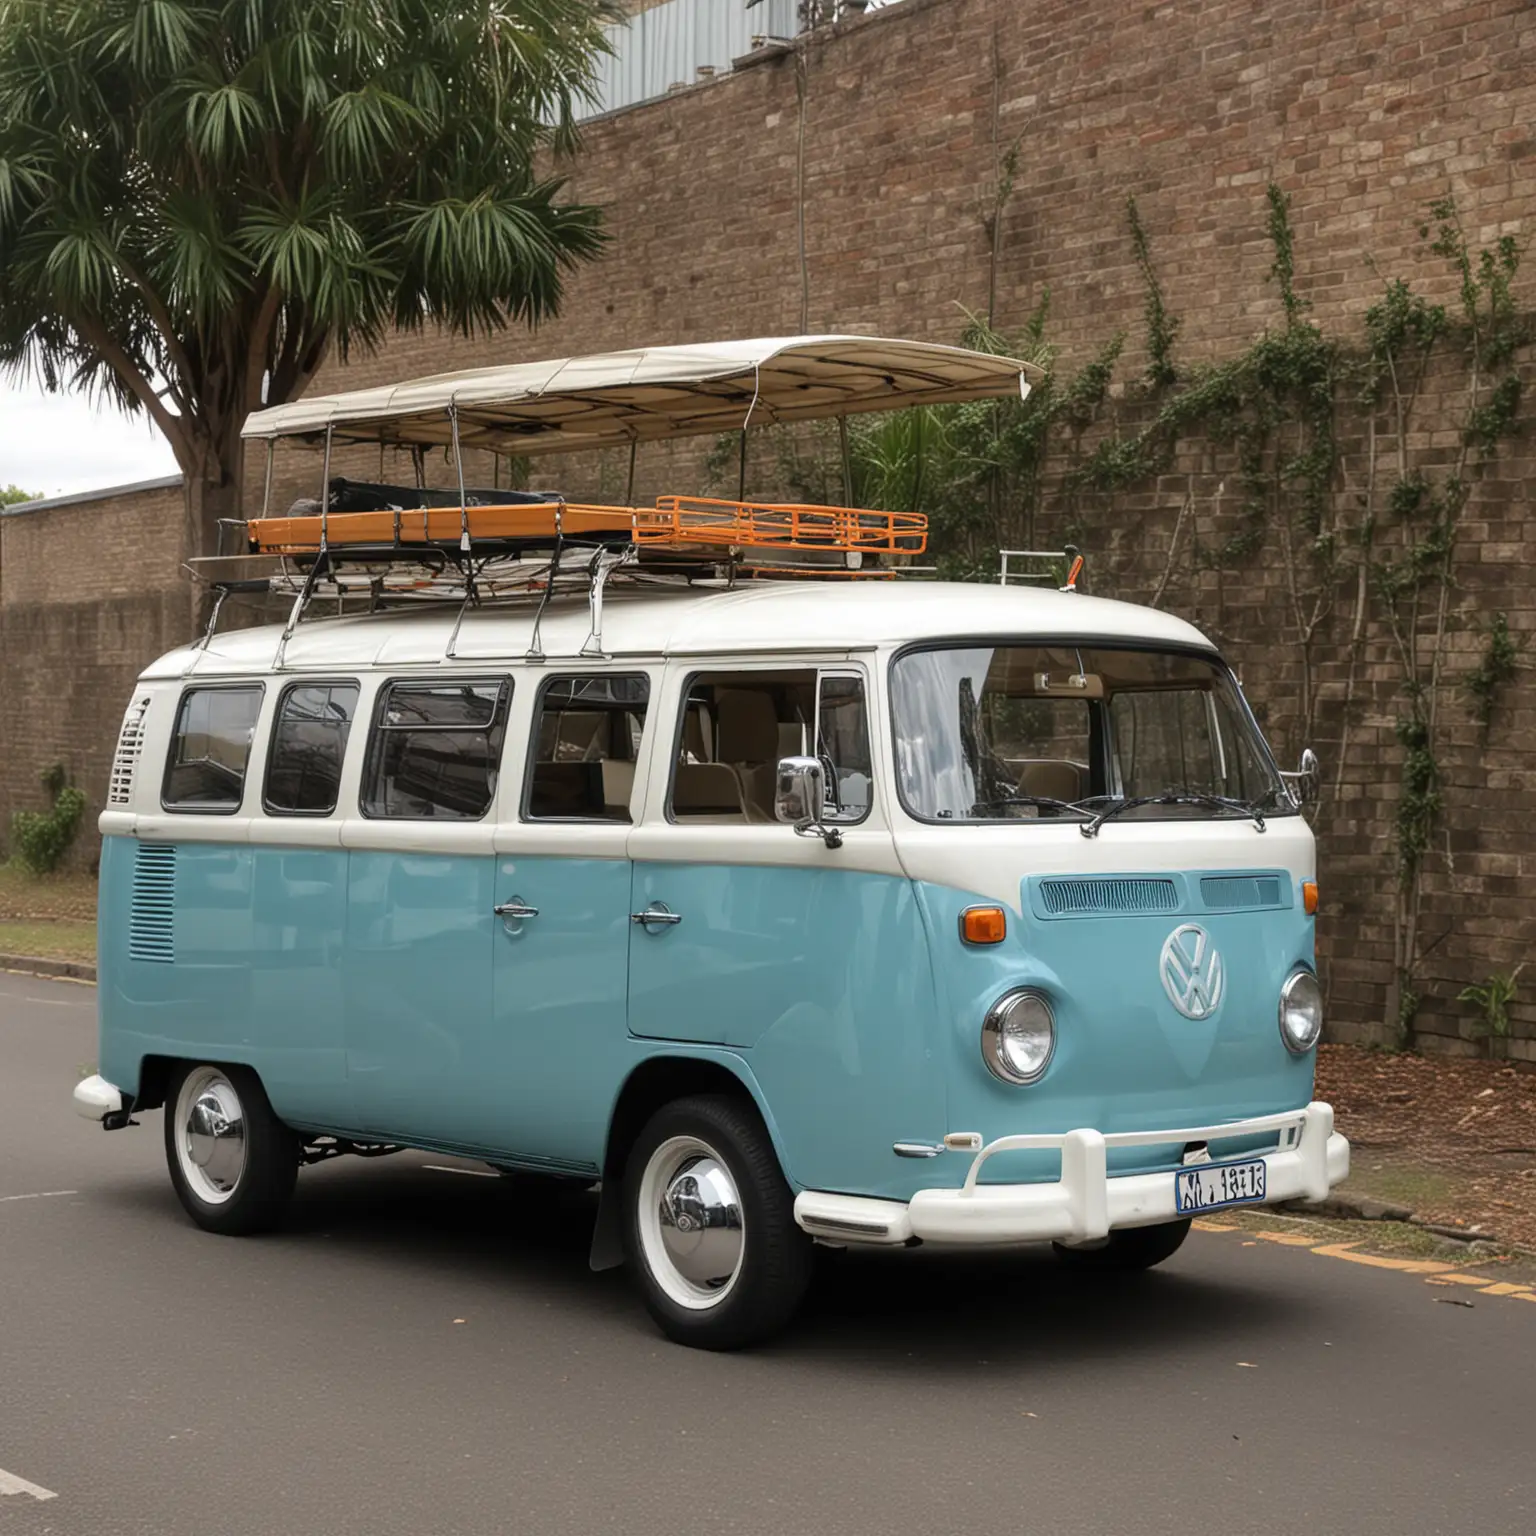 Fully Restored Classic Kombi Van in Vibrant Colors Parked by the Beach